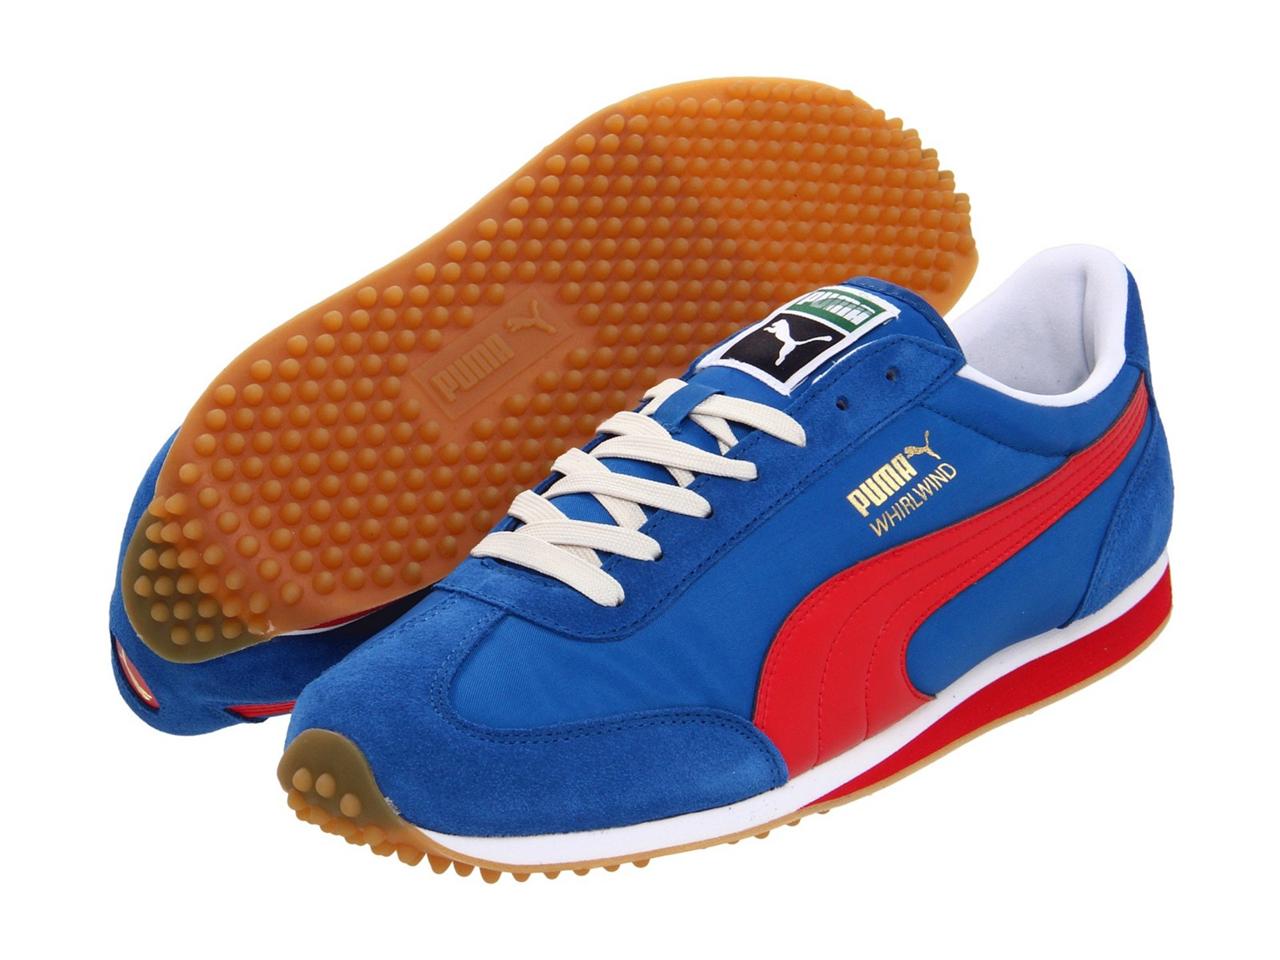 Puma: Men's Whirlwind Classic Running Shoes Snorkel Blue Ribbon Red Gum